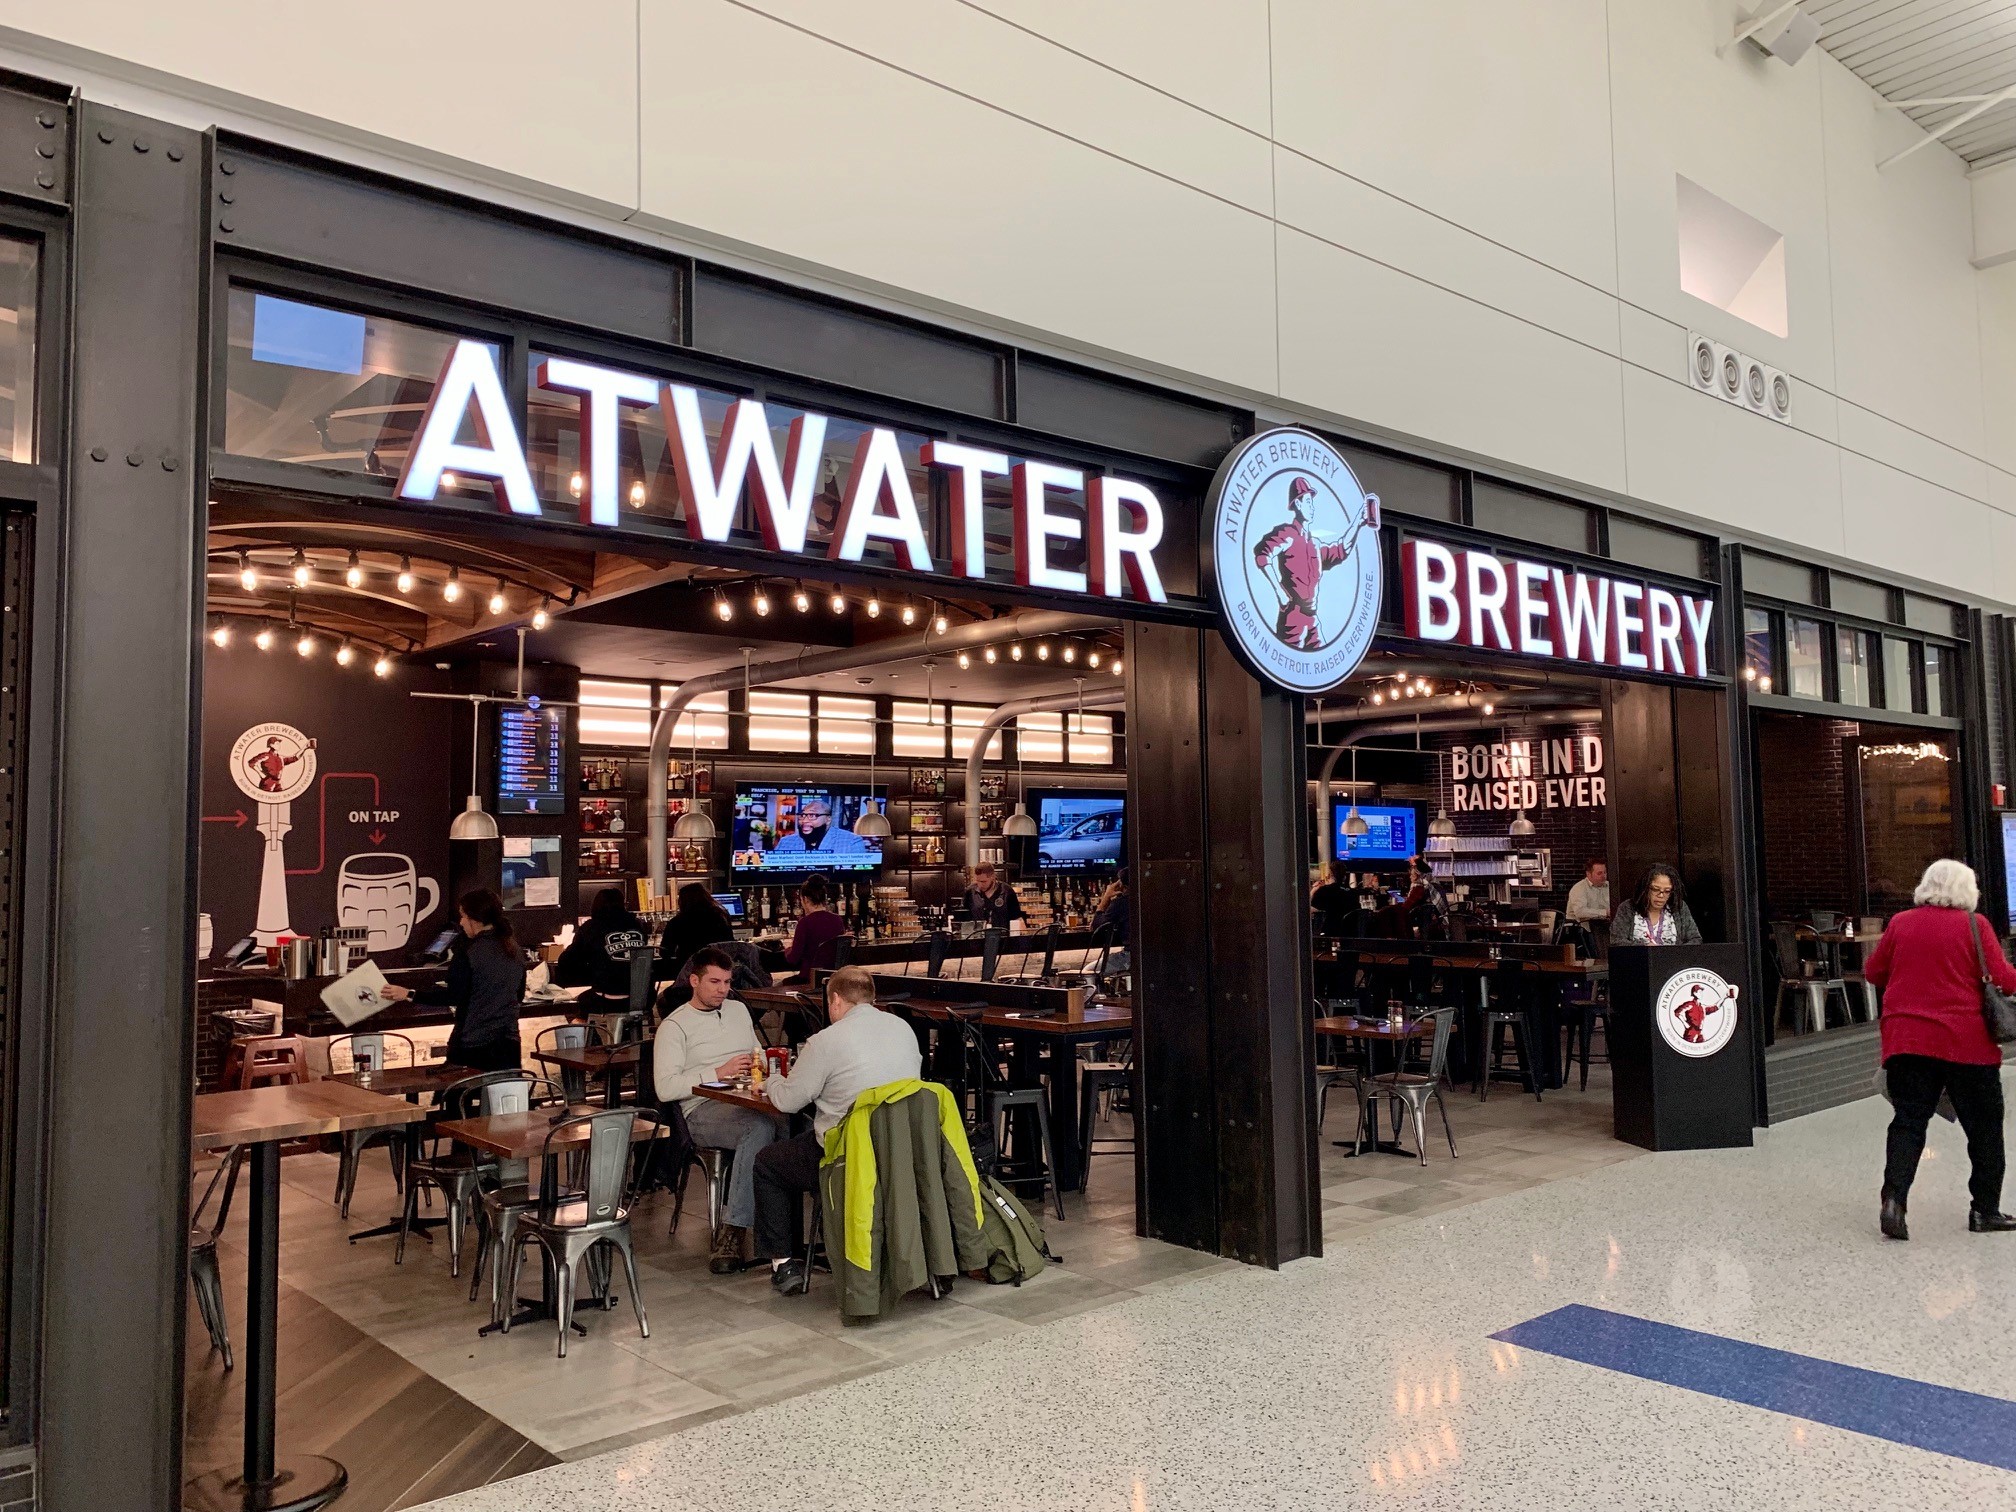 Atwater brewery airport restaurant.